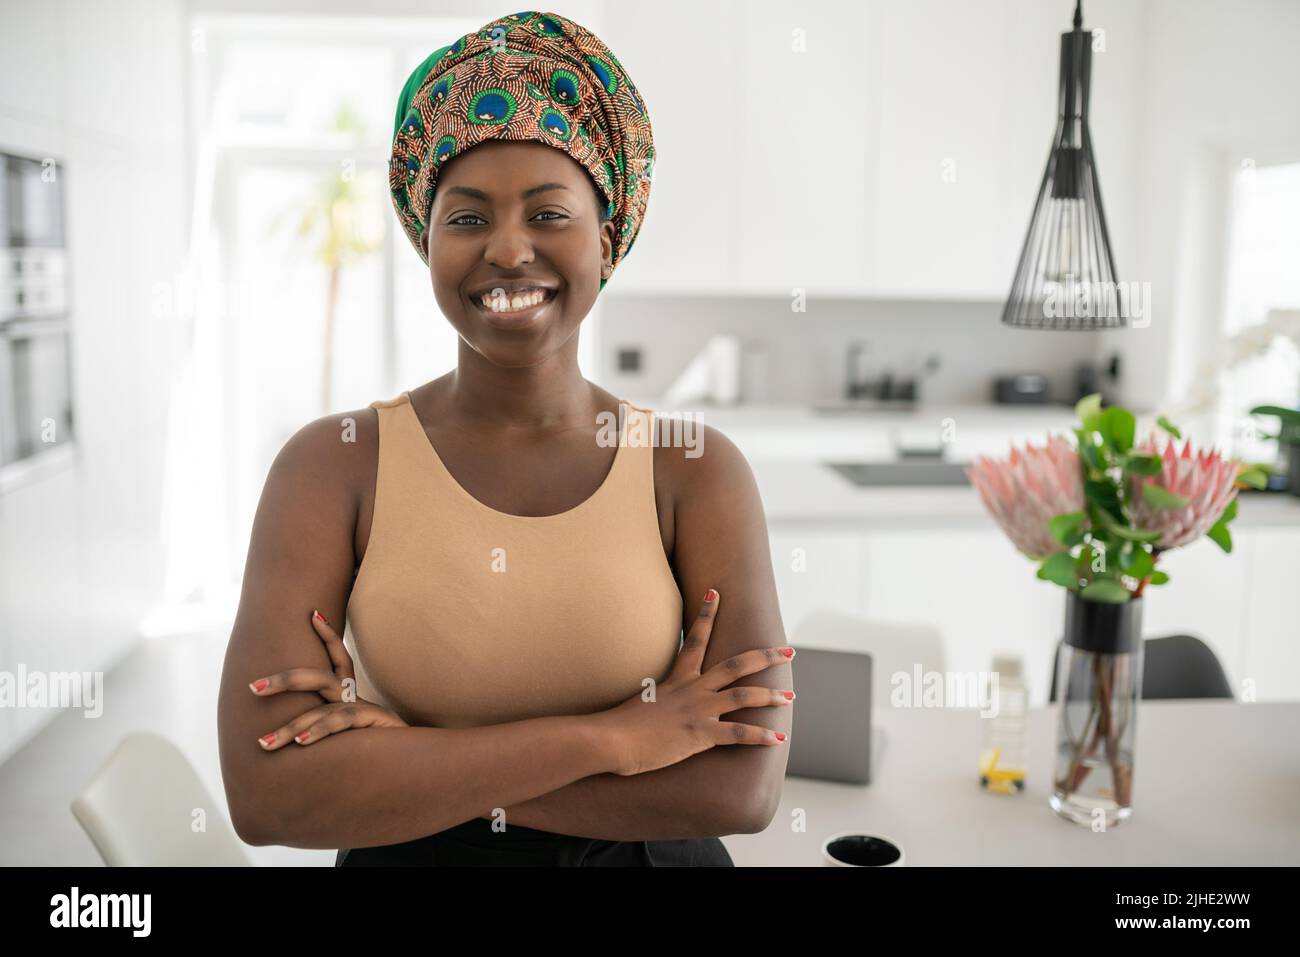 Portrait of a confident smiling African woman with her arms crossed looking into the camera. Working from home and wearing a traditional headscarf Stock Photo